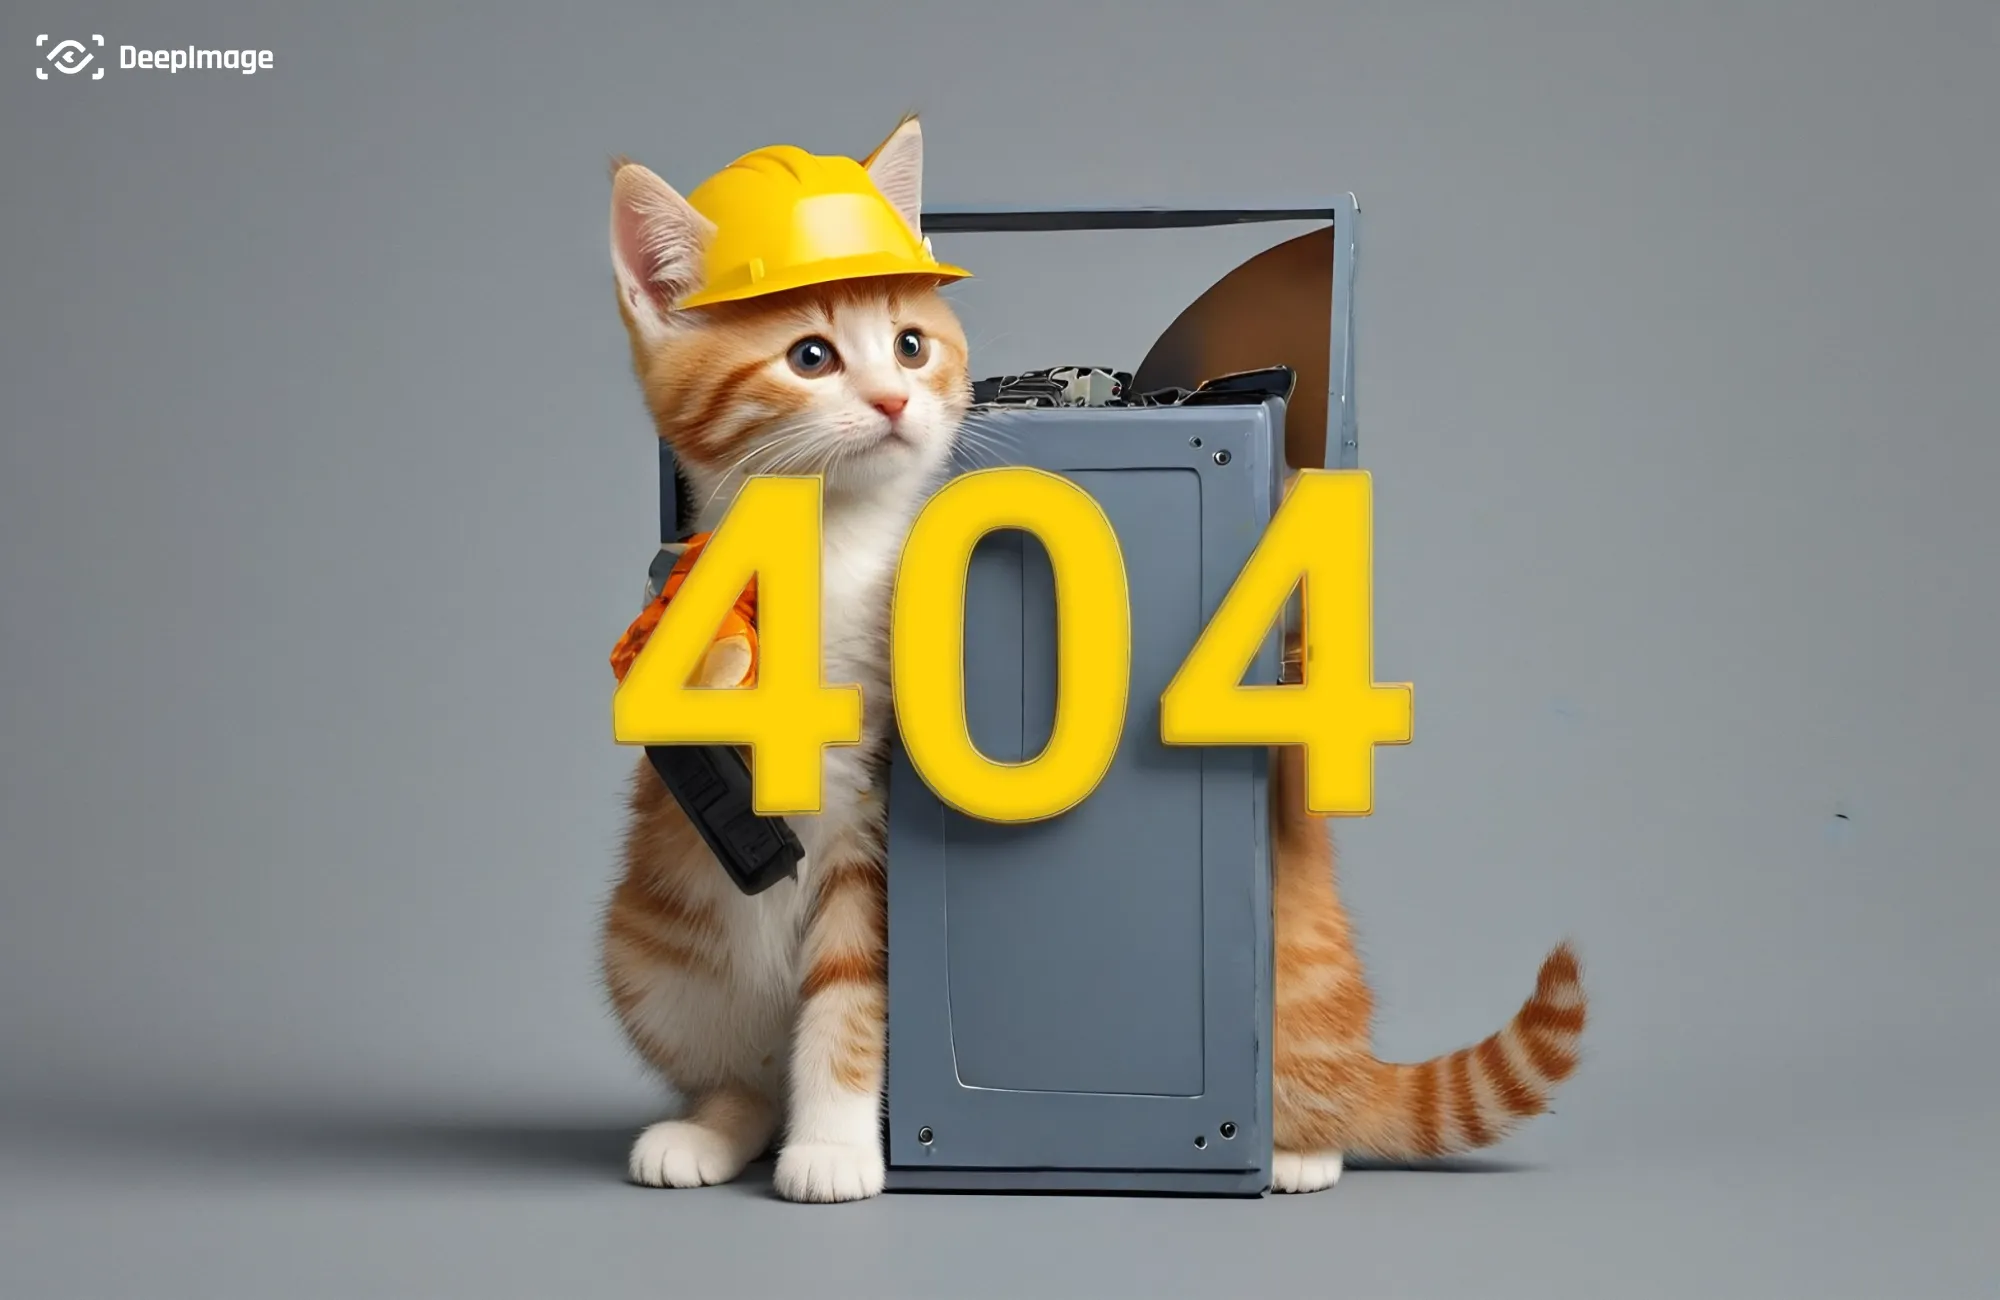 Free 404 Page error images and how to make more of those in seconds!